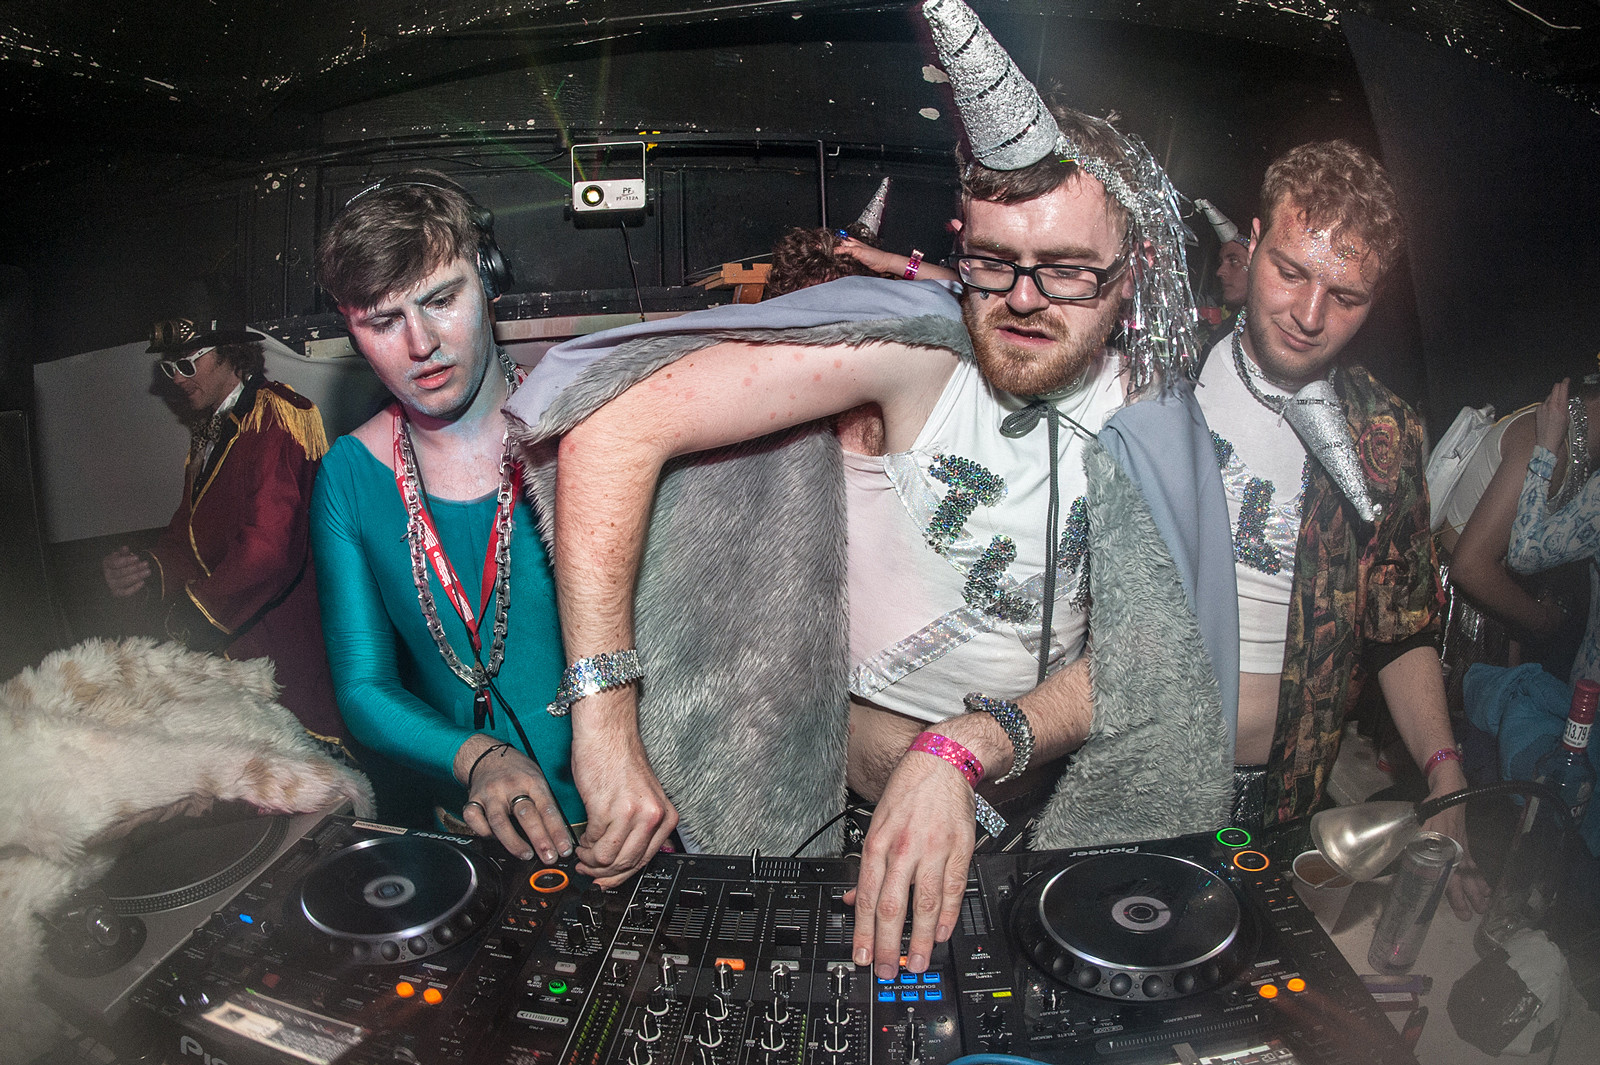 Bristol's lesser-spotted unicorn DJs at our favourite nightclub.